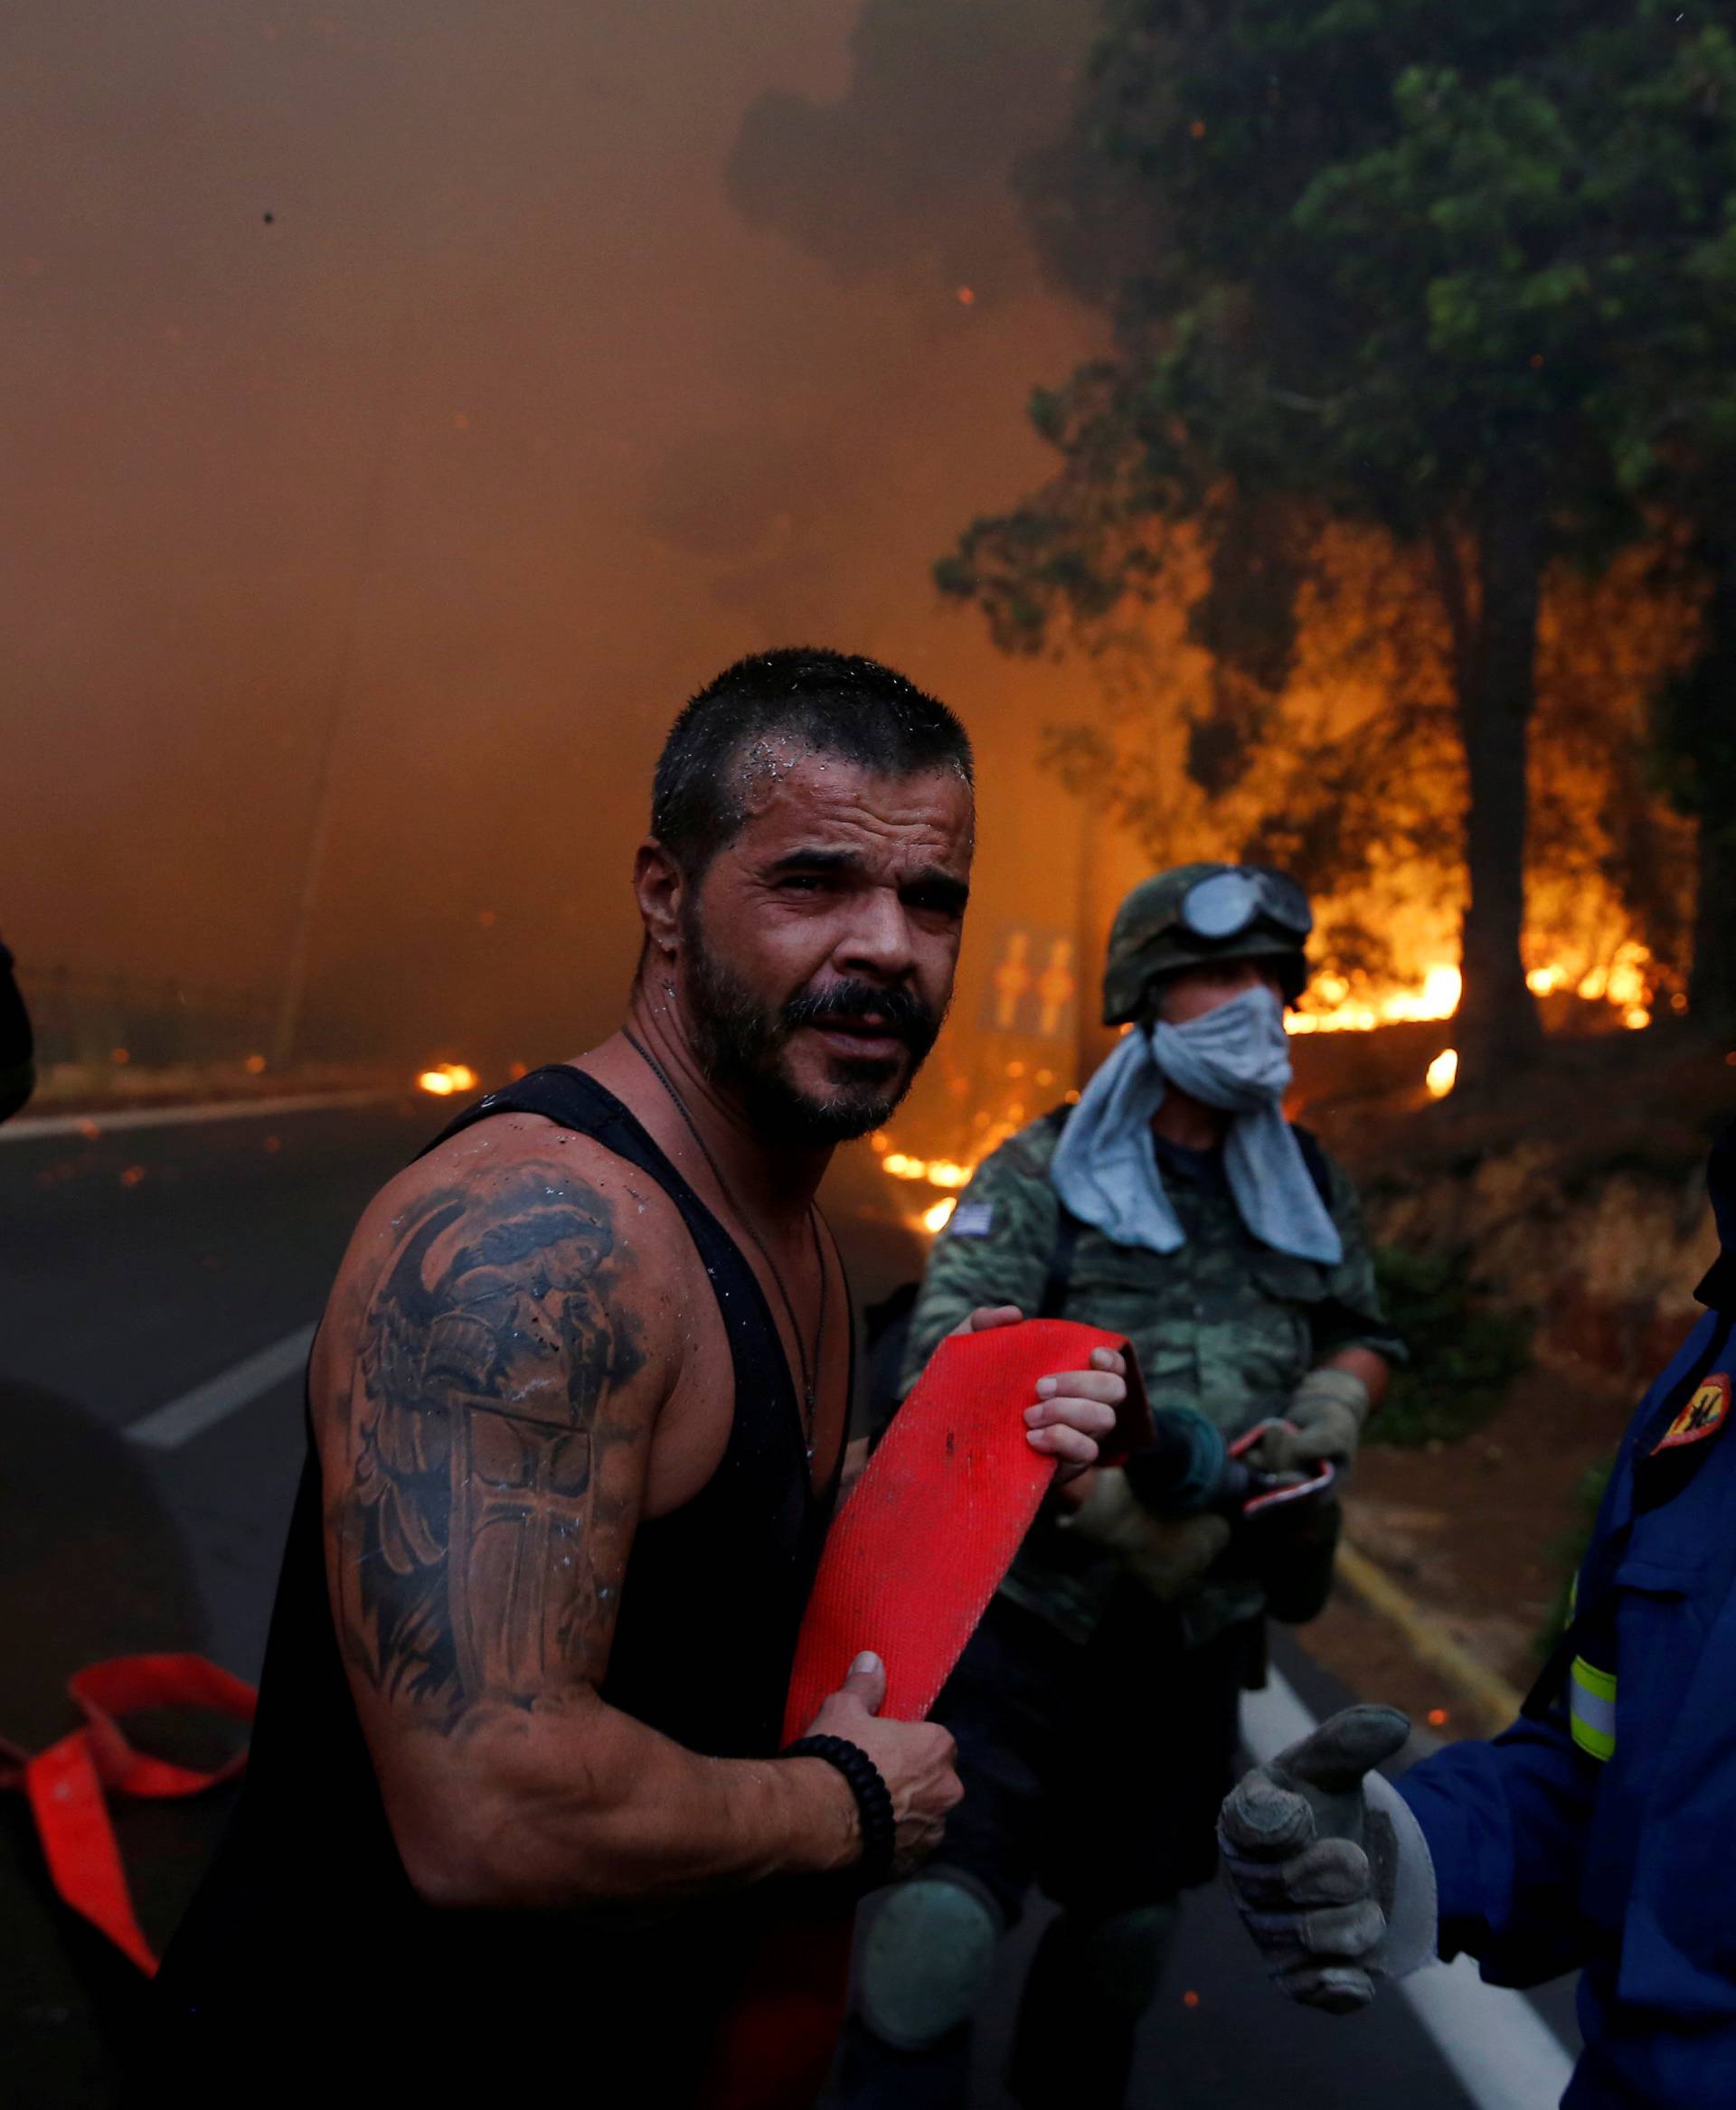 Firefighters, soldiers and local residents carry a hose as a wildfire burns in the town of Rafina, near Athens